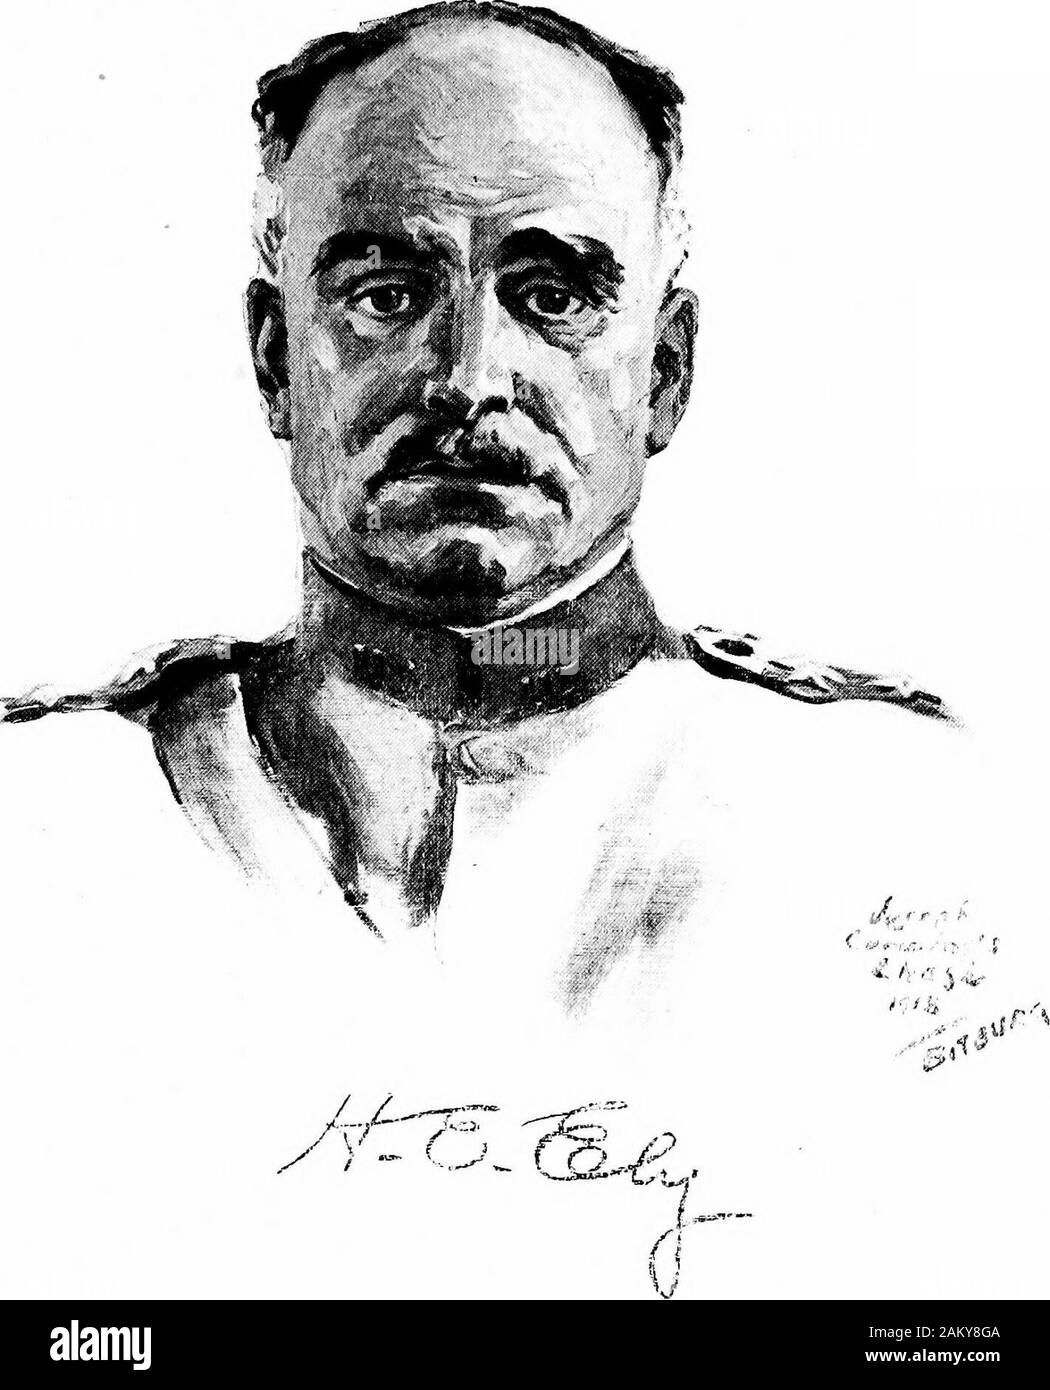 Soldiers all; portraits and sketches of the men of the AEF. . Juttfh CrfpfltfS (.hflU -Sup93-1 «? J Jo^T^-yC ^Wu^- MAJOR GENERAL HANSON E. ELY Arrived in France, June 15, 1917, with rank ofColonel.Promotions: Brigadier General, July 9, 1918;Major General, October 4, 1918.Assignments: Chief of Staff, 1st Division;Commanded 28th Infantry; Commanded 3rd Infantry Brigade, July 15, 1918;Commanded 5th Division, October 18, 1918.Born: Iowa, November 23, 1867.Distinguished Service Medal. For exceptionally meritorious and distin-guished services. He commanded with skilland marked distinction a regiment Stock Photo